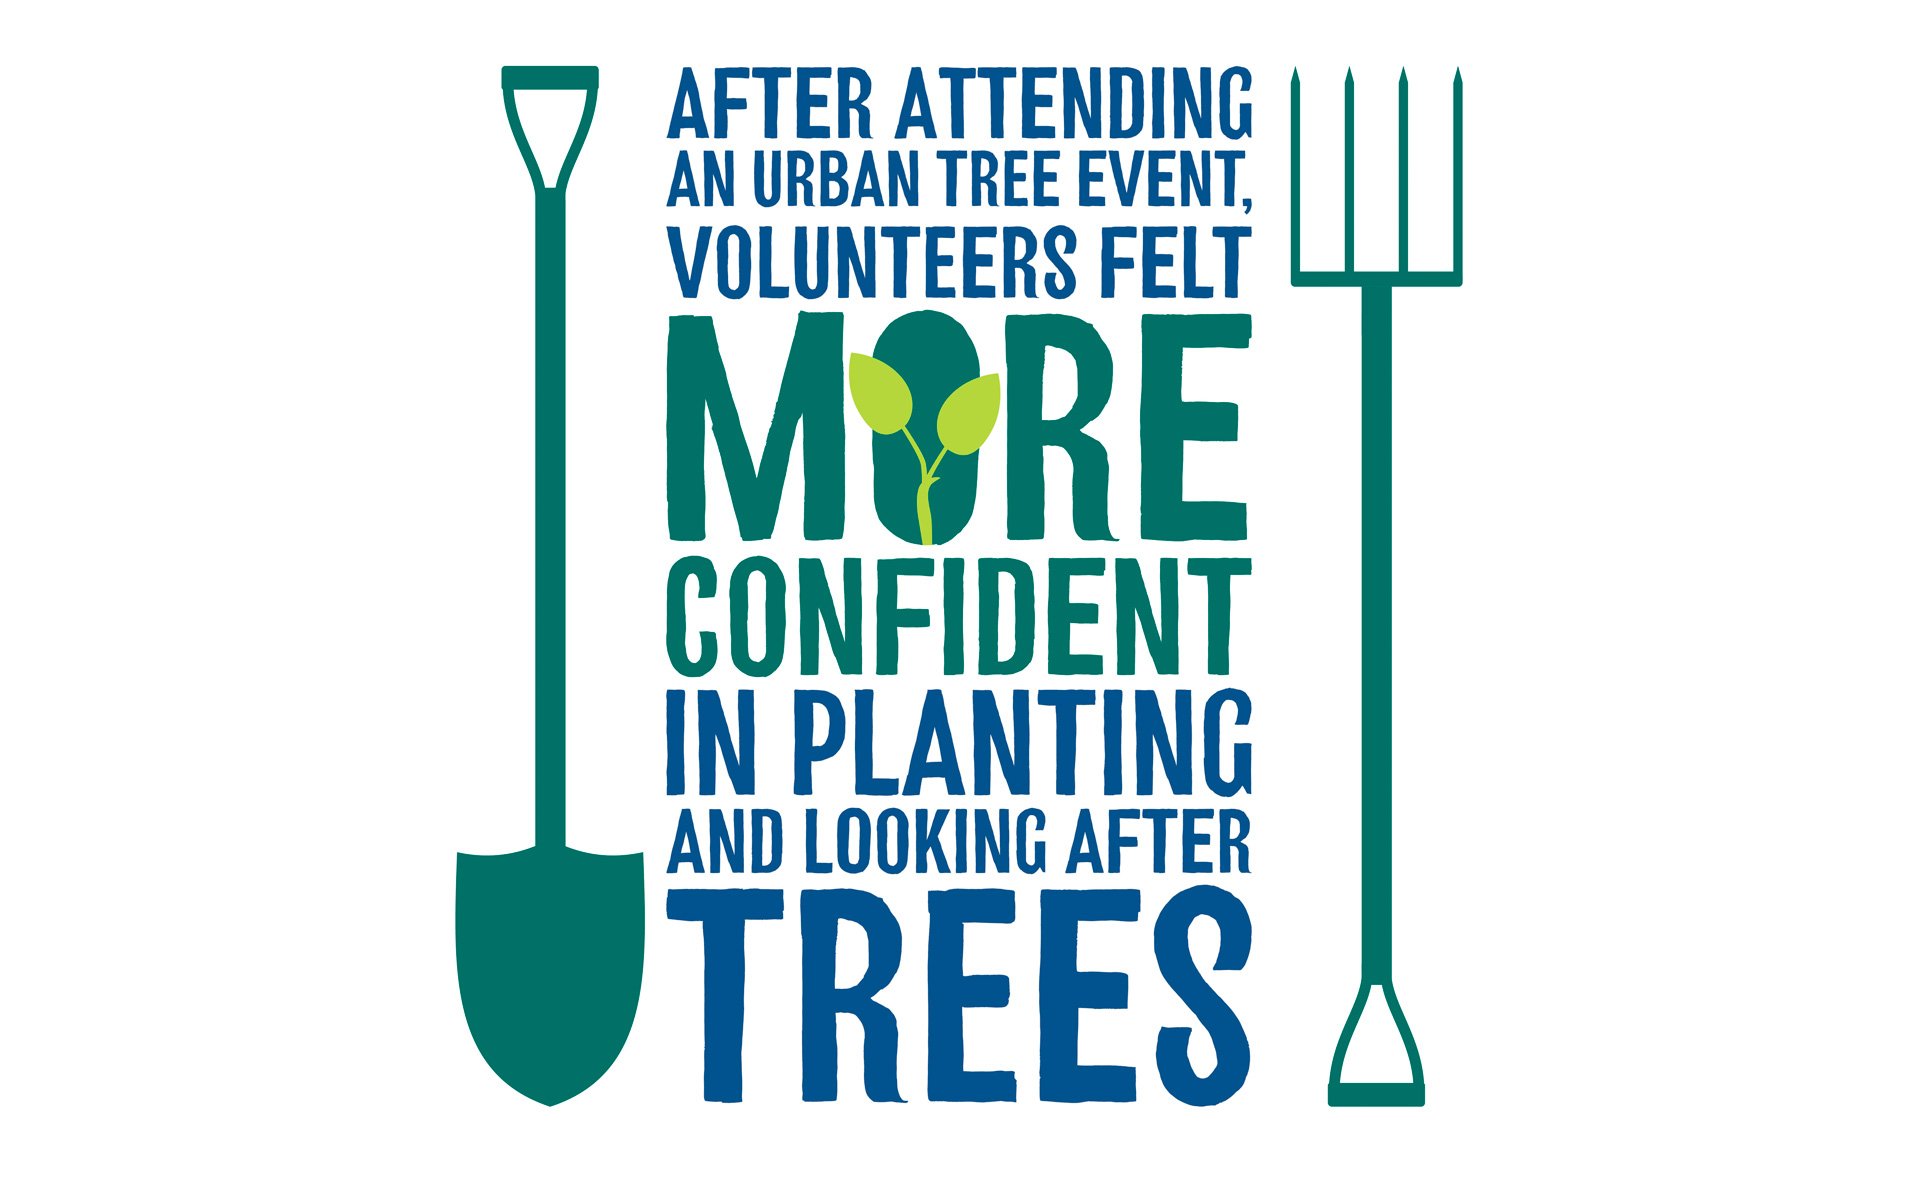 A sample of 585-1148 people:<br>Average confidence in tree planting: 3.5 out of 5 before and 4.3 out of 5 after the event<br>Average confidence in looking after trees: 3.2 out of 5 before and 3.7 out of 5 after the event<br>On a scale of 1 to 5,1 = not confident at all and 5 = completely confident.